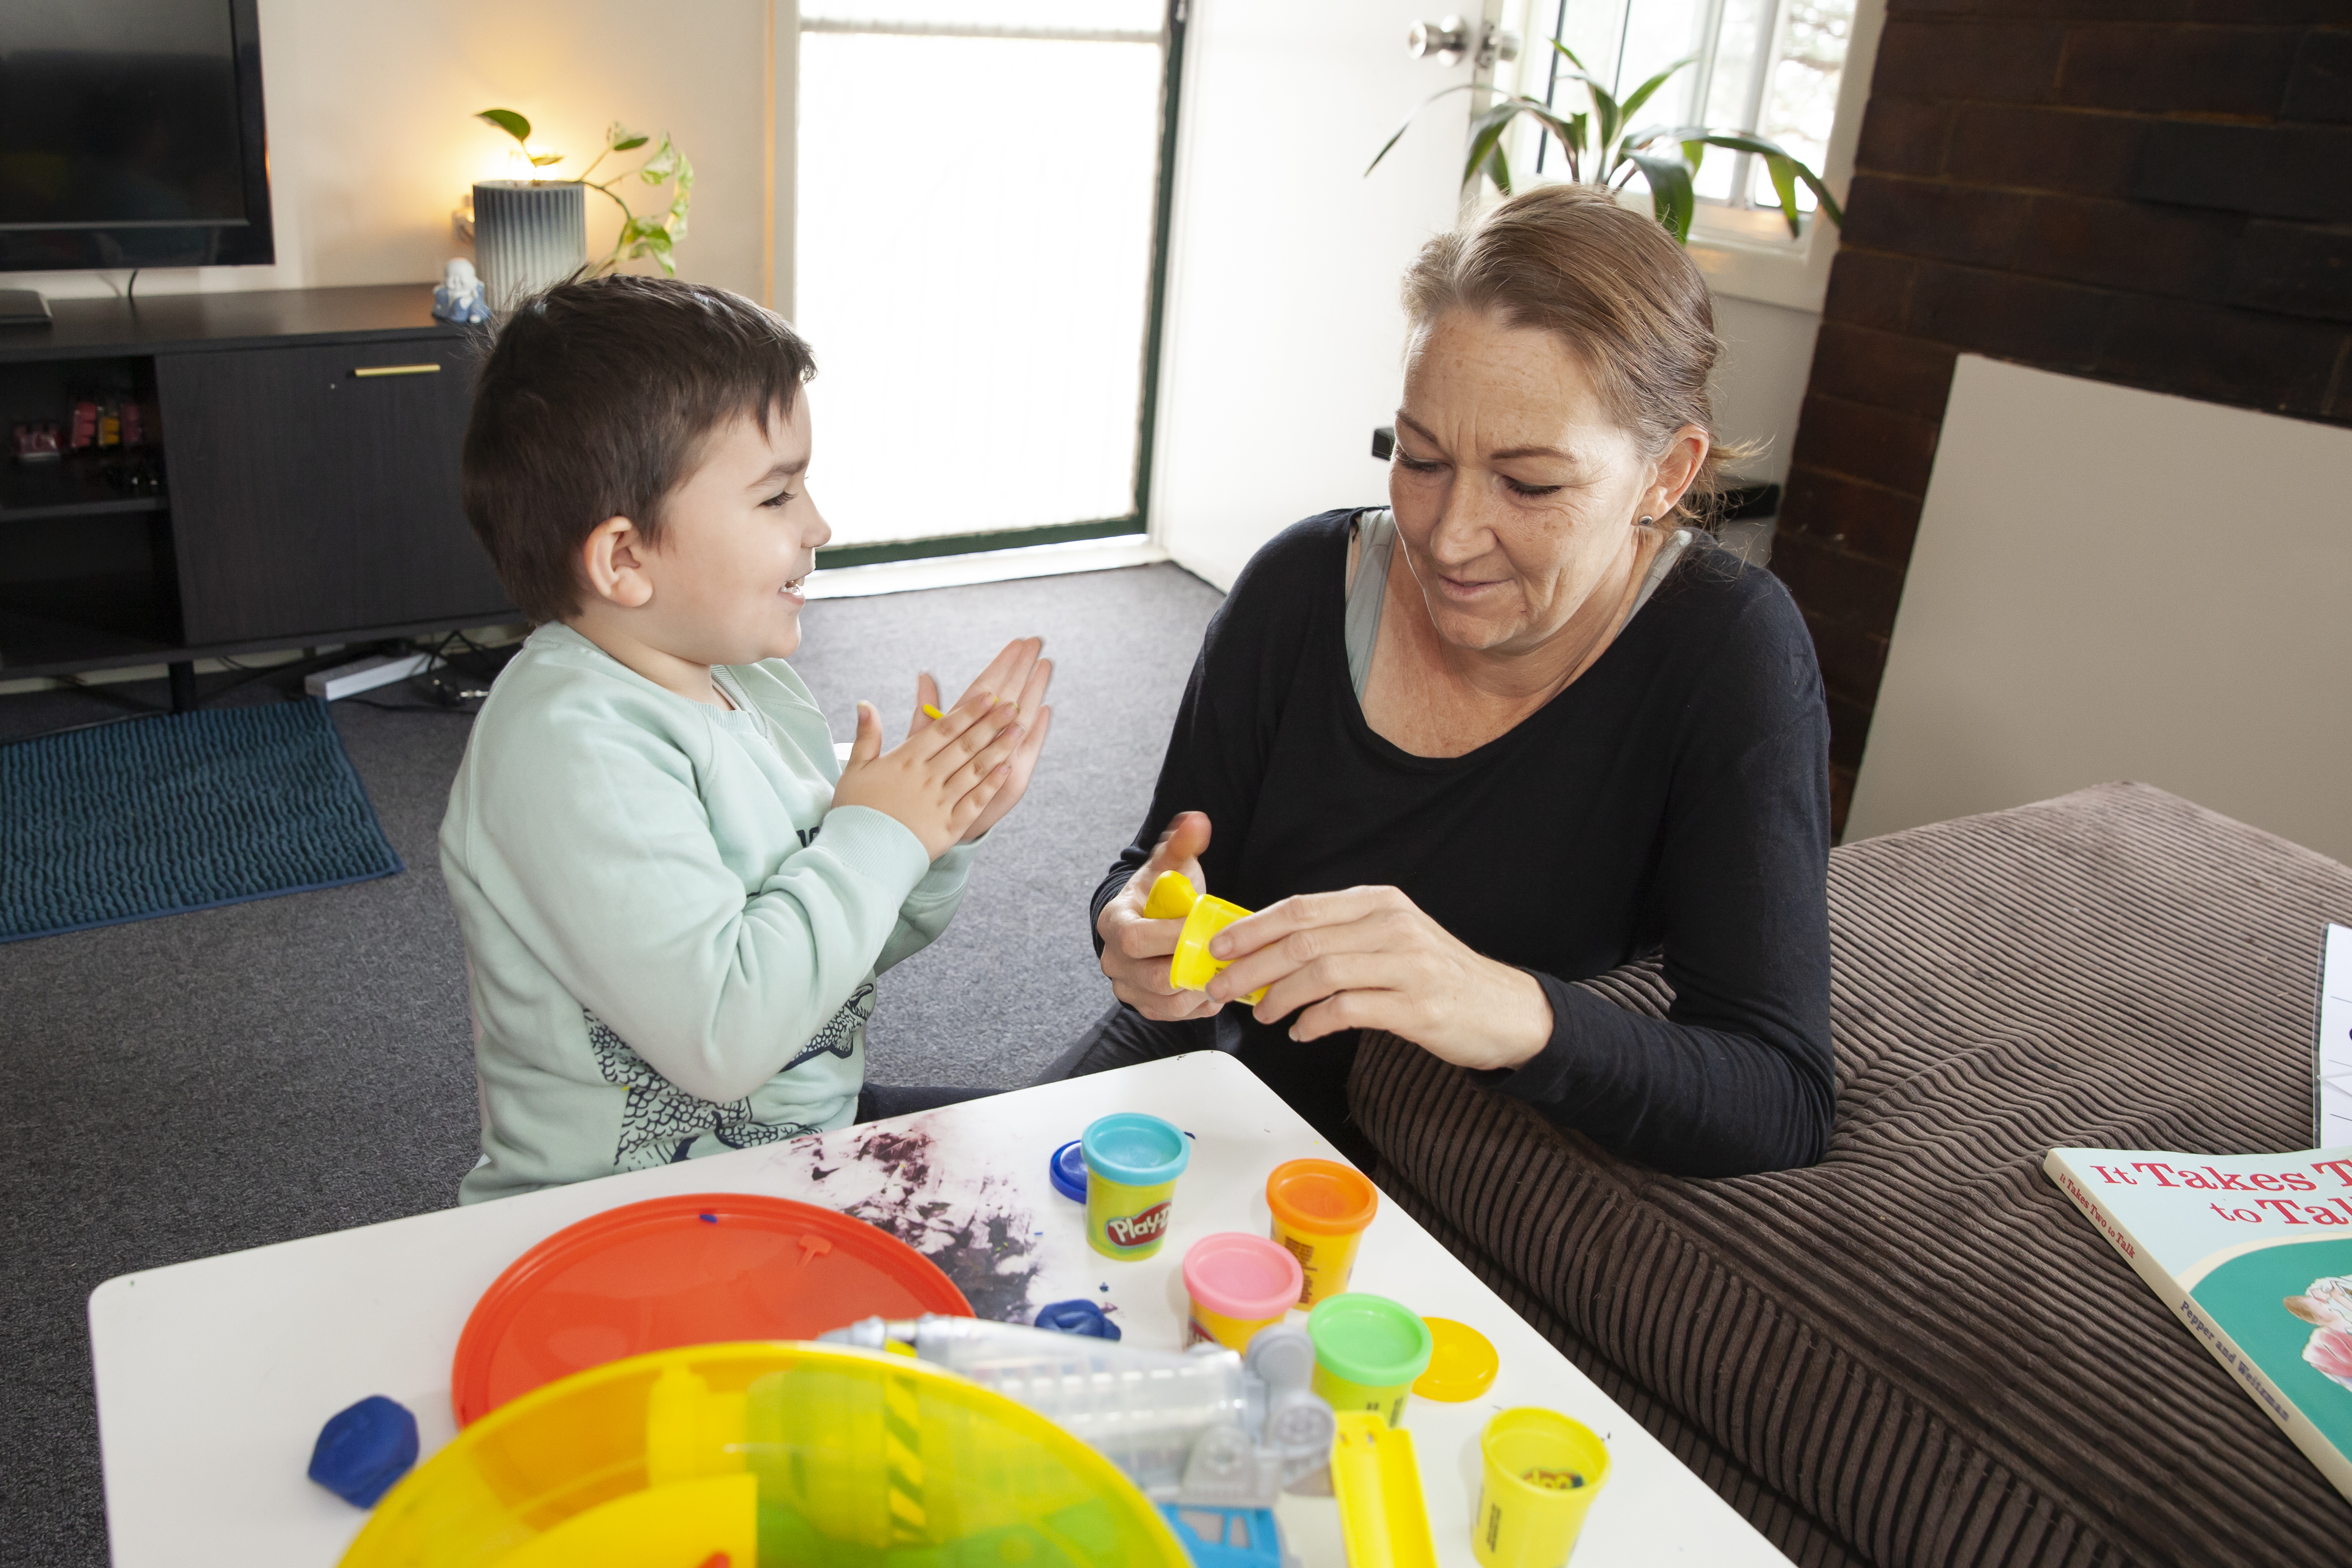 Young boy playing with play doh with Occupational Therapist